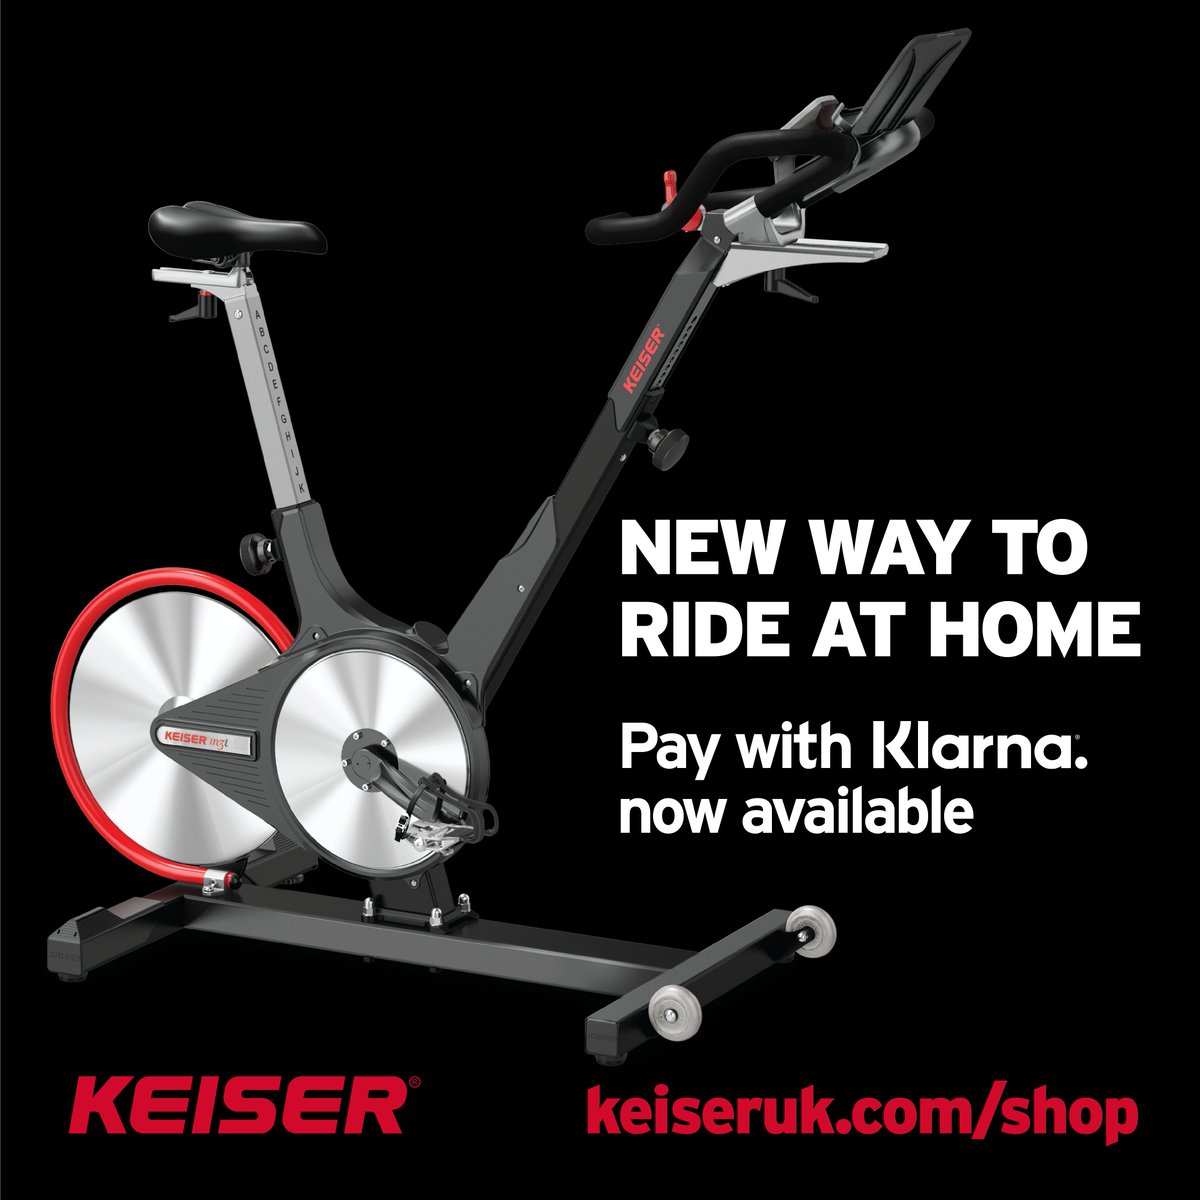 If you have been waiting to purchase an M3i for home.... this is your sign. Klarna is now available with purchases at the Keiser UK shop- head to keiseruk.com/shop and select Klarna at the checkout.